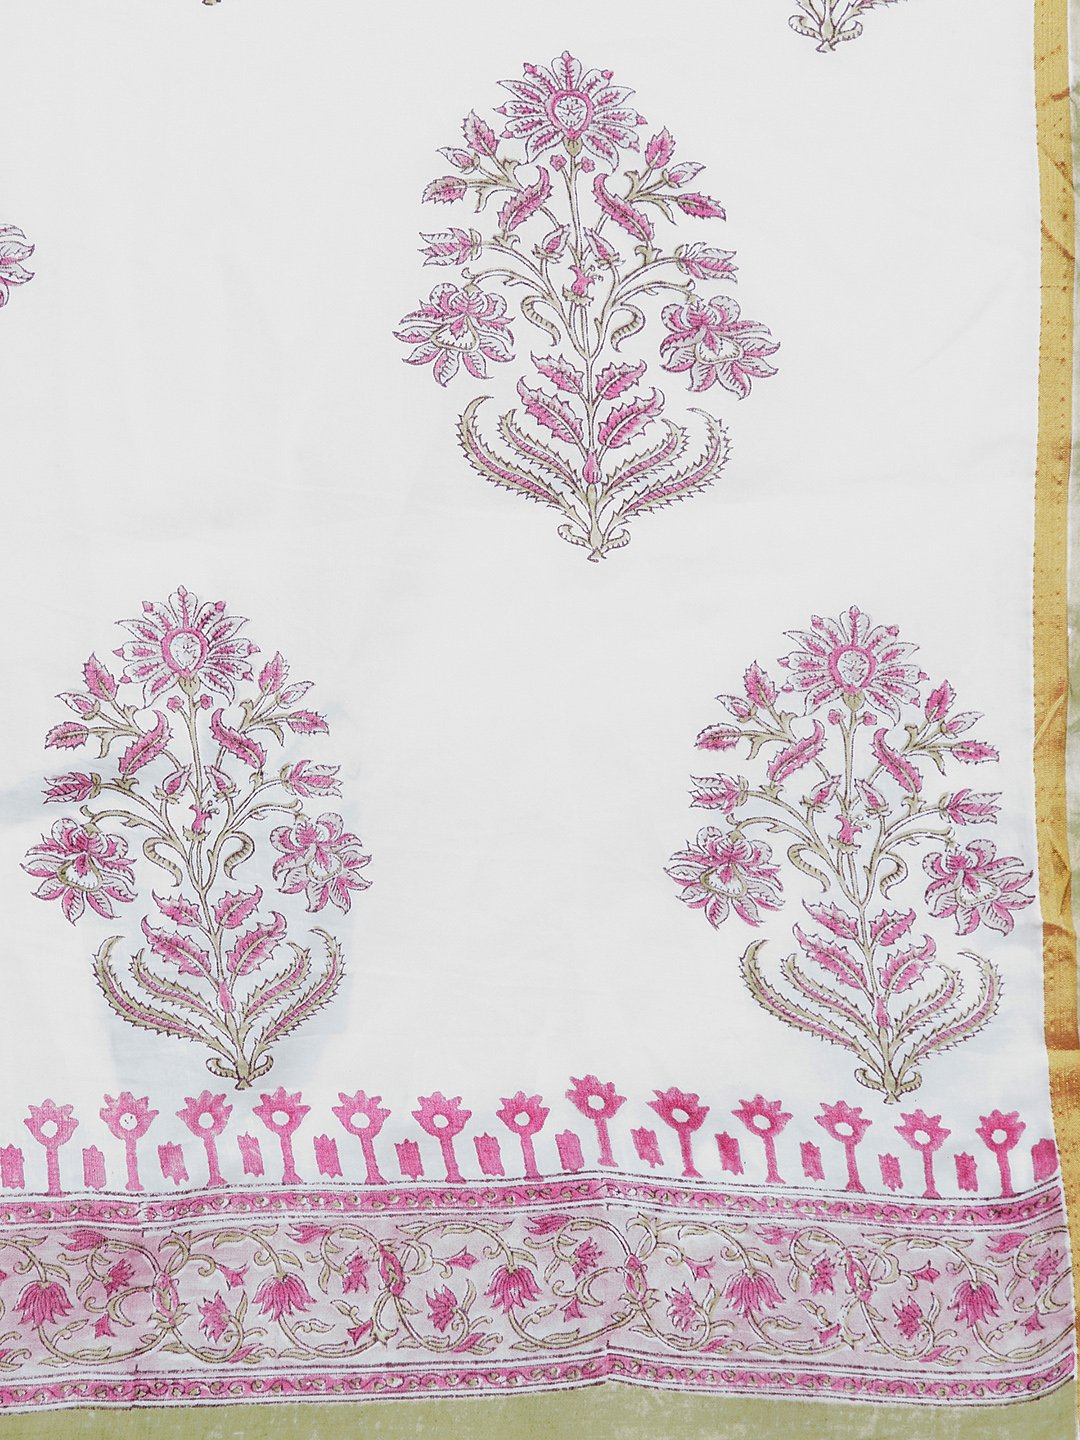 White & Pink Mughal Hand Block Print Handcrafted Cotton Saree-Saree-Kalakari India-BHKPSA0022-Cotton, Geographical Indication, Hand Blocks, Hand Crafted, Heritage Prints, Sanganeri, Sarees, Sustainable Fabrics-[Linen,Ethnic,wear,Fashionista,Handloom,Handicraft,Indigo,blockprint,block,print,Cotton,Chanderi,Blue, latest,classy,party,bollywood,trendy,summer,style,traditional,formal,elegant,unique,style,hand,block,print, dabu,booti,gift,present,glamorous,affordable,collectible,Sari,Saree,printed, ho